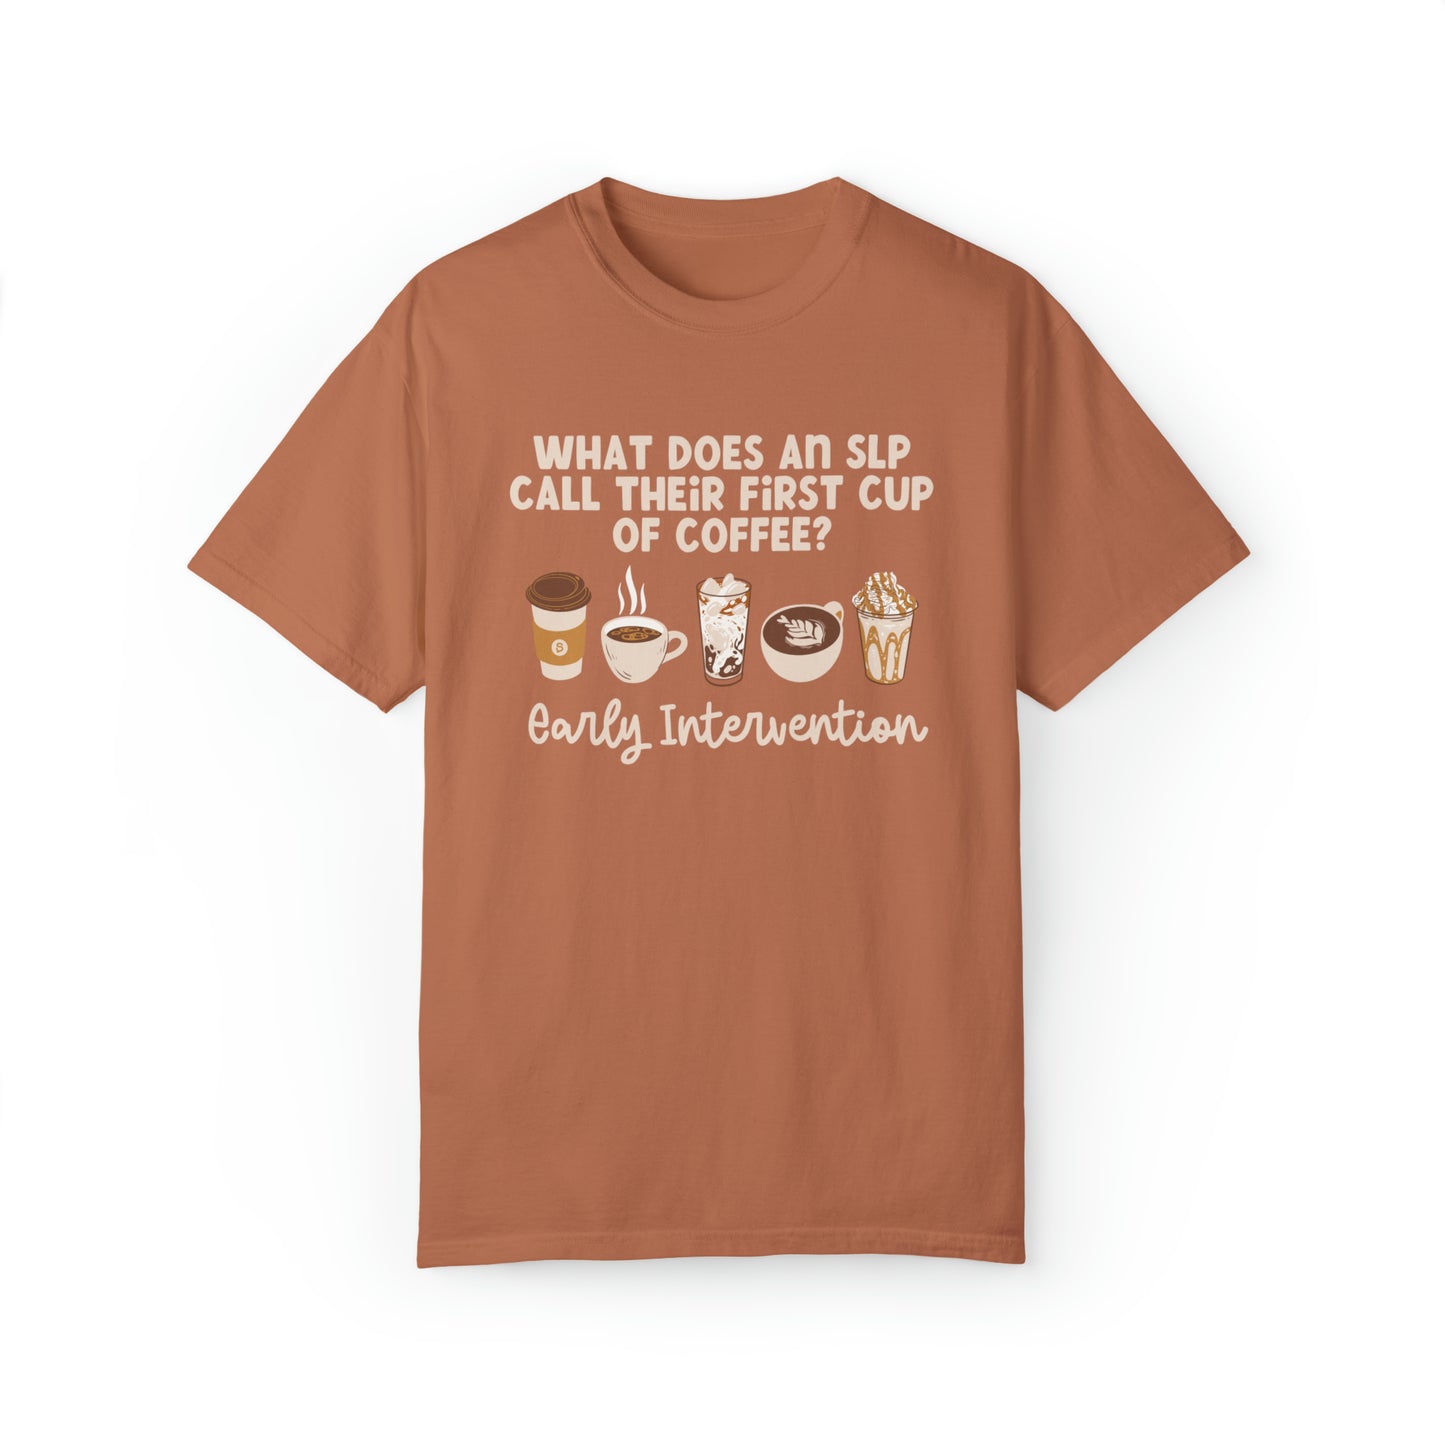 What Does An SLP Call Their First Cup of Coffee Tee